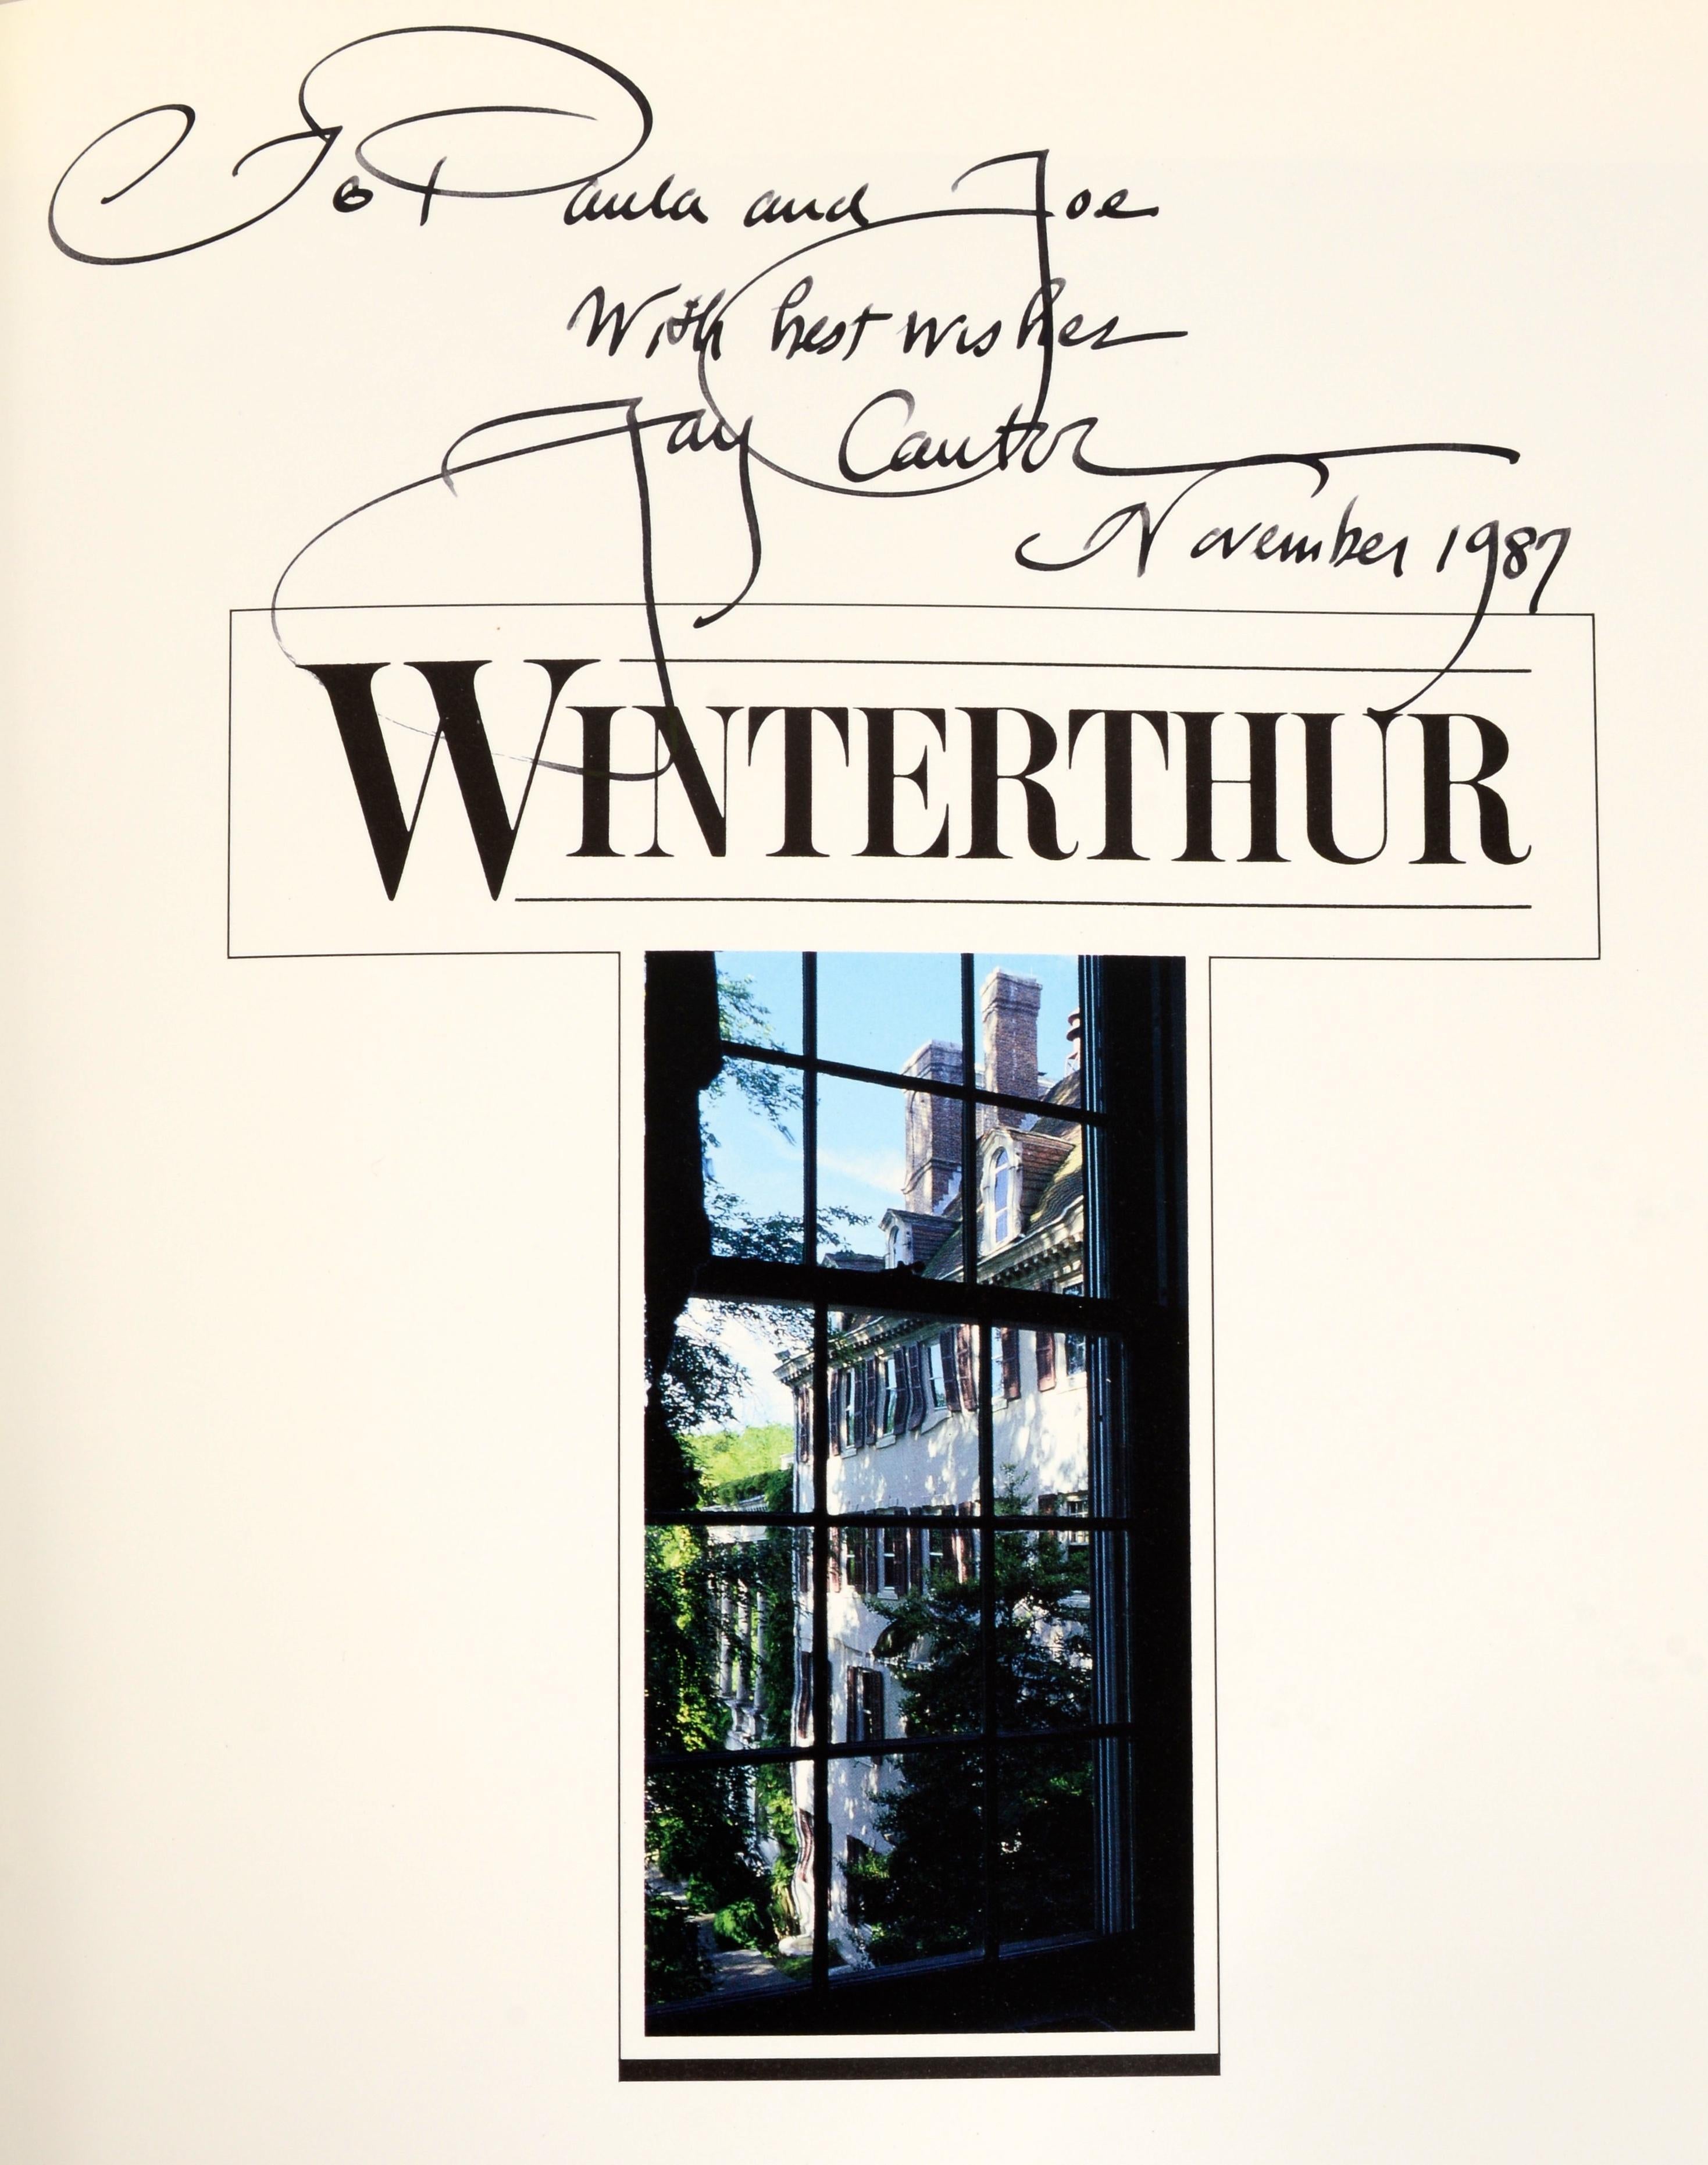 Winterthur by Jay E. Cantor, Signed and Inscribed by the Author. Published by Harry N. Abrams, New York, NY, 1986. 2nd Ed hardcover with dust jacket. Traces the history of the Delaware mansion now used as a museum and describes its invaluable